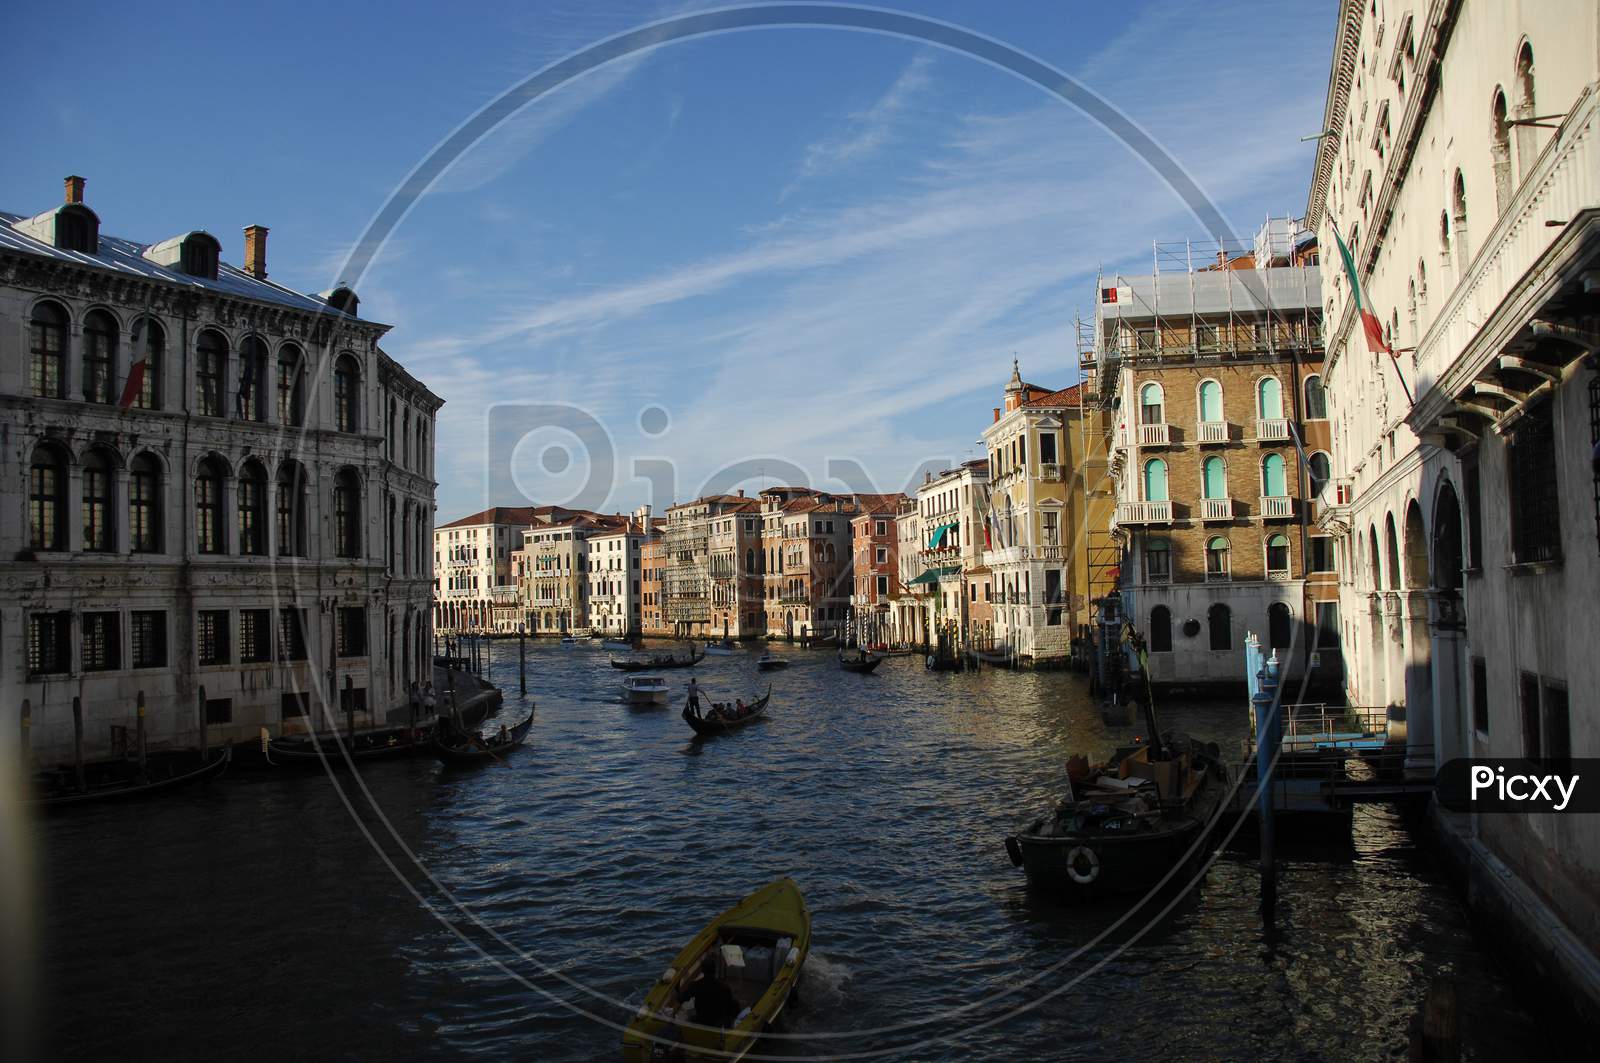 Landscape of Grand canal in Venice, Italy